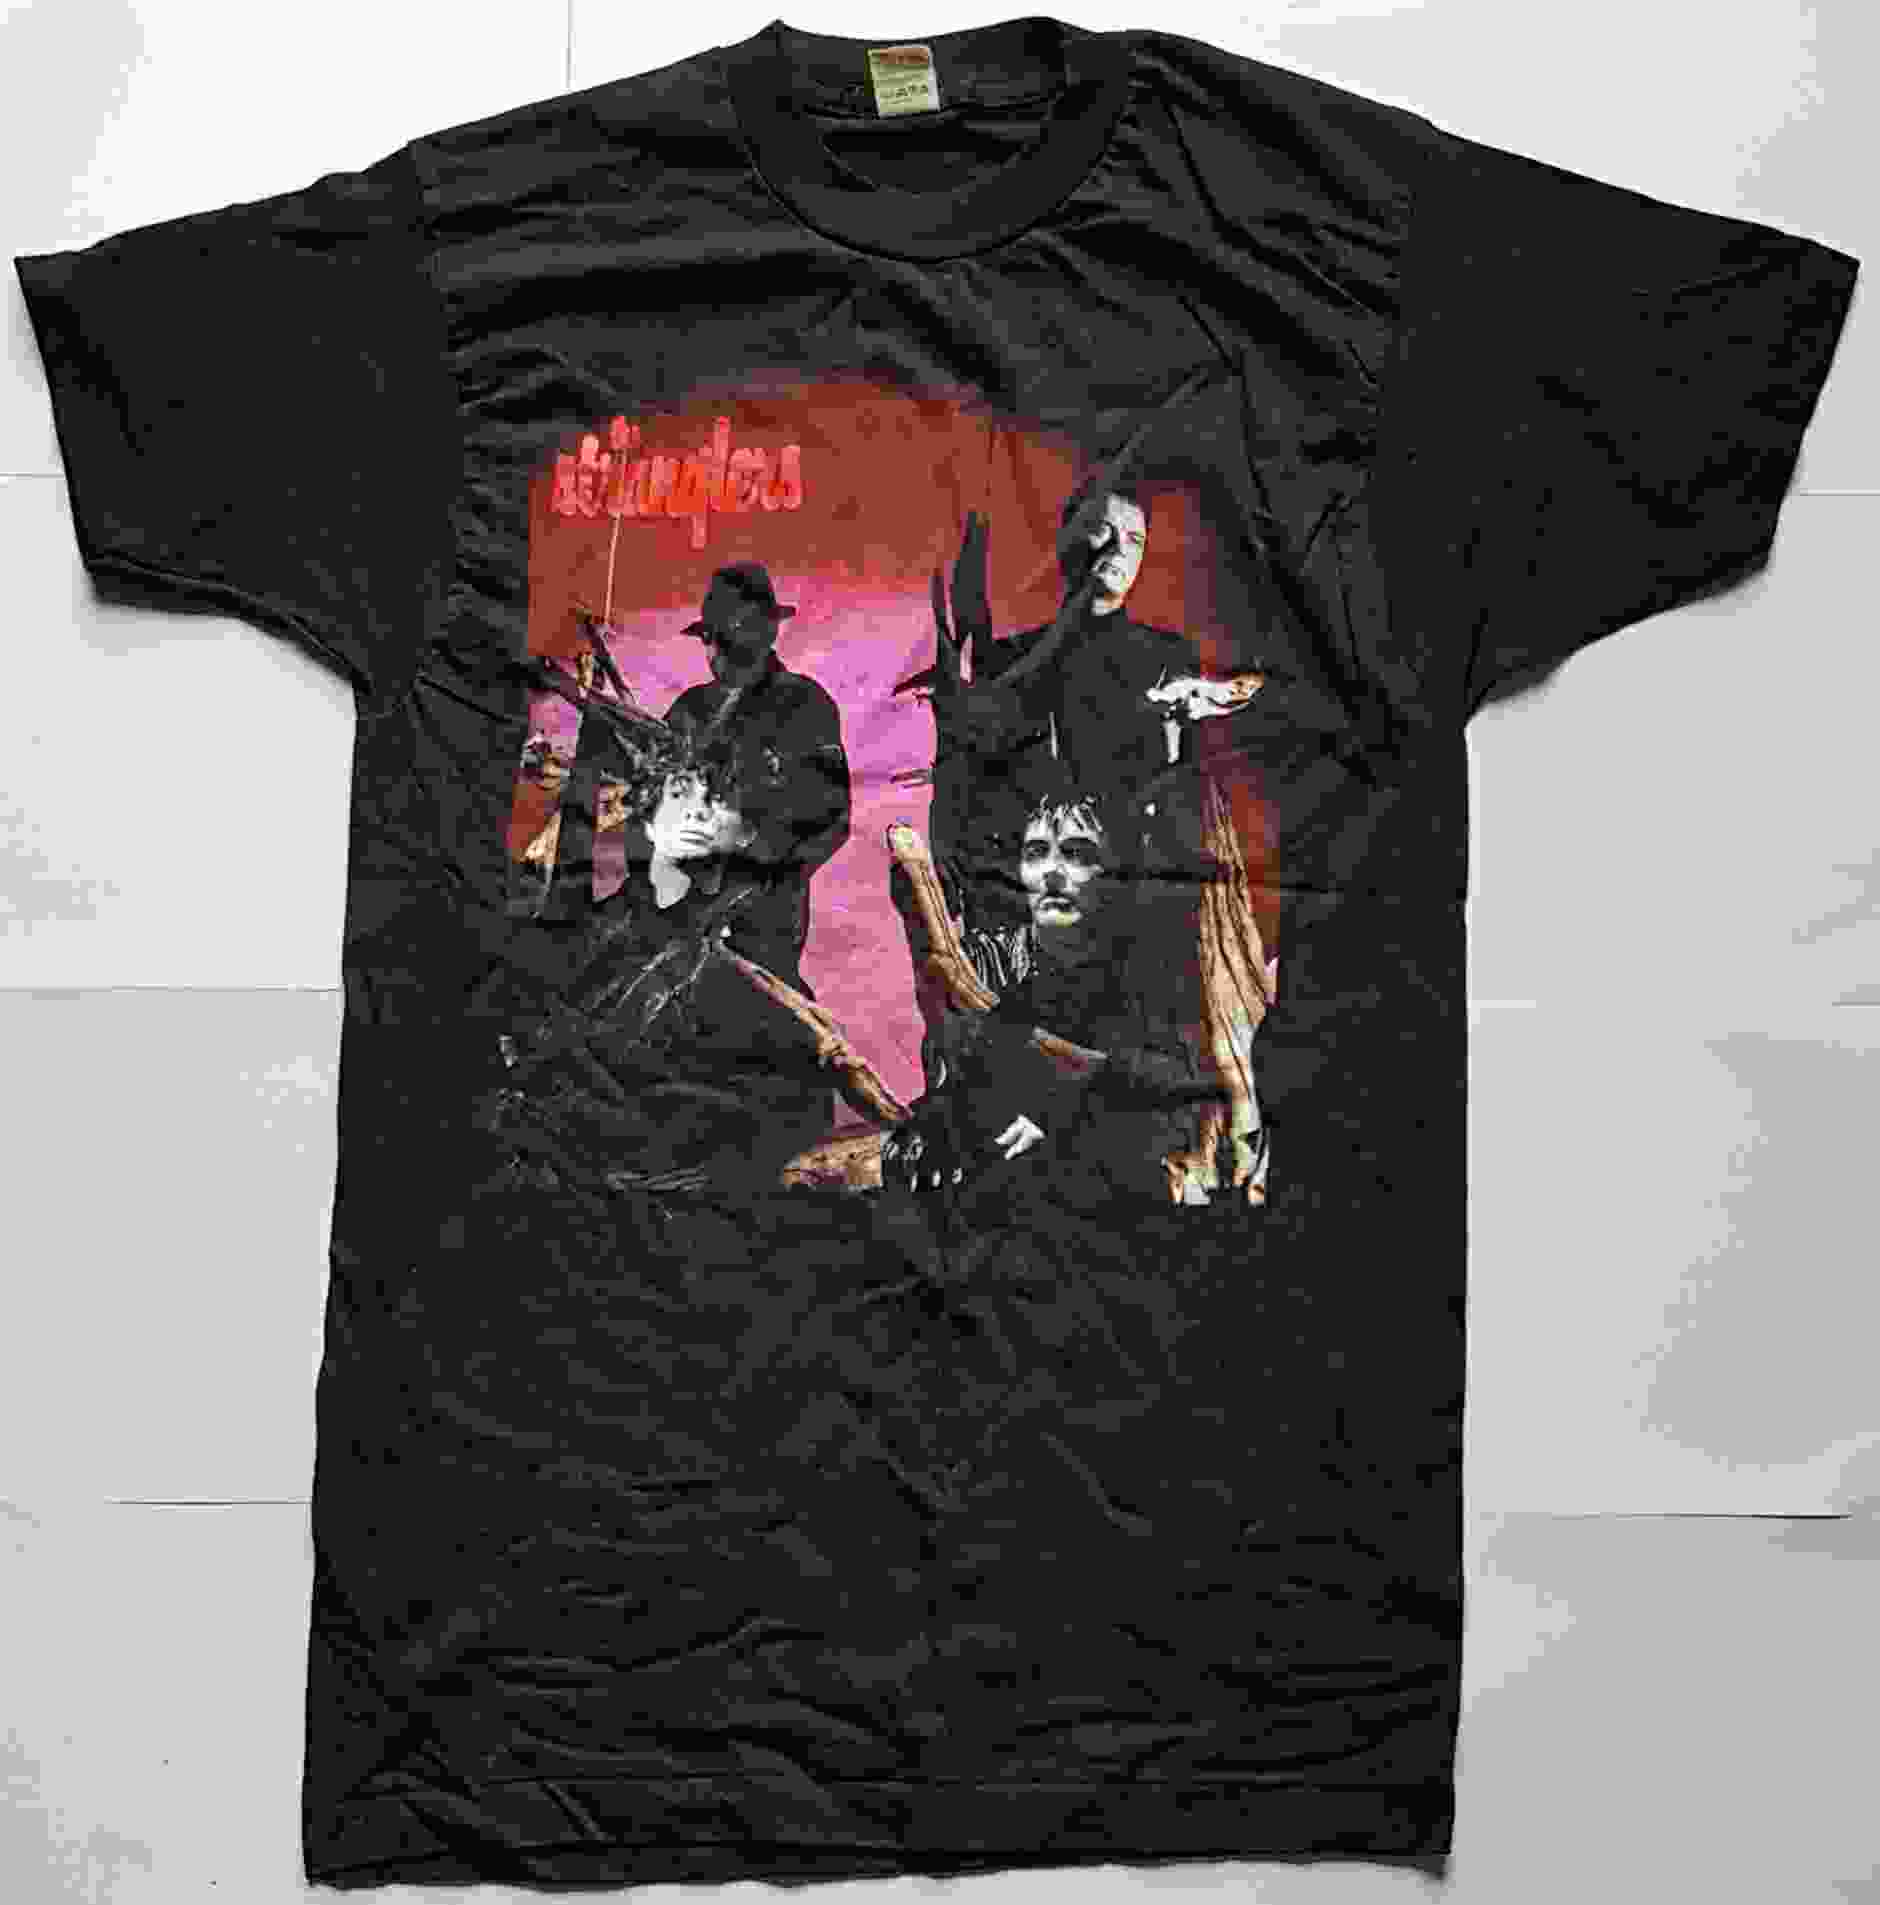 Picture of TS-TS-band Band by artist The Stranglers from The Stranglers clothes